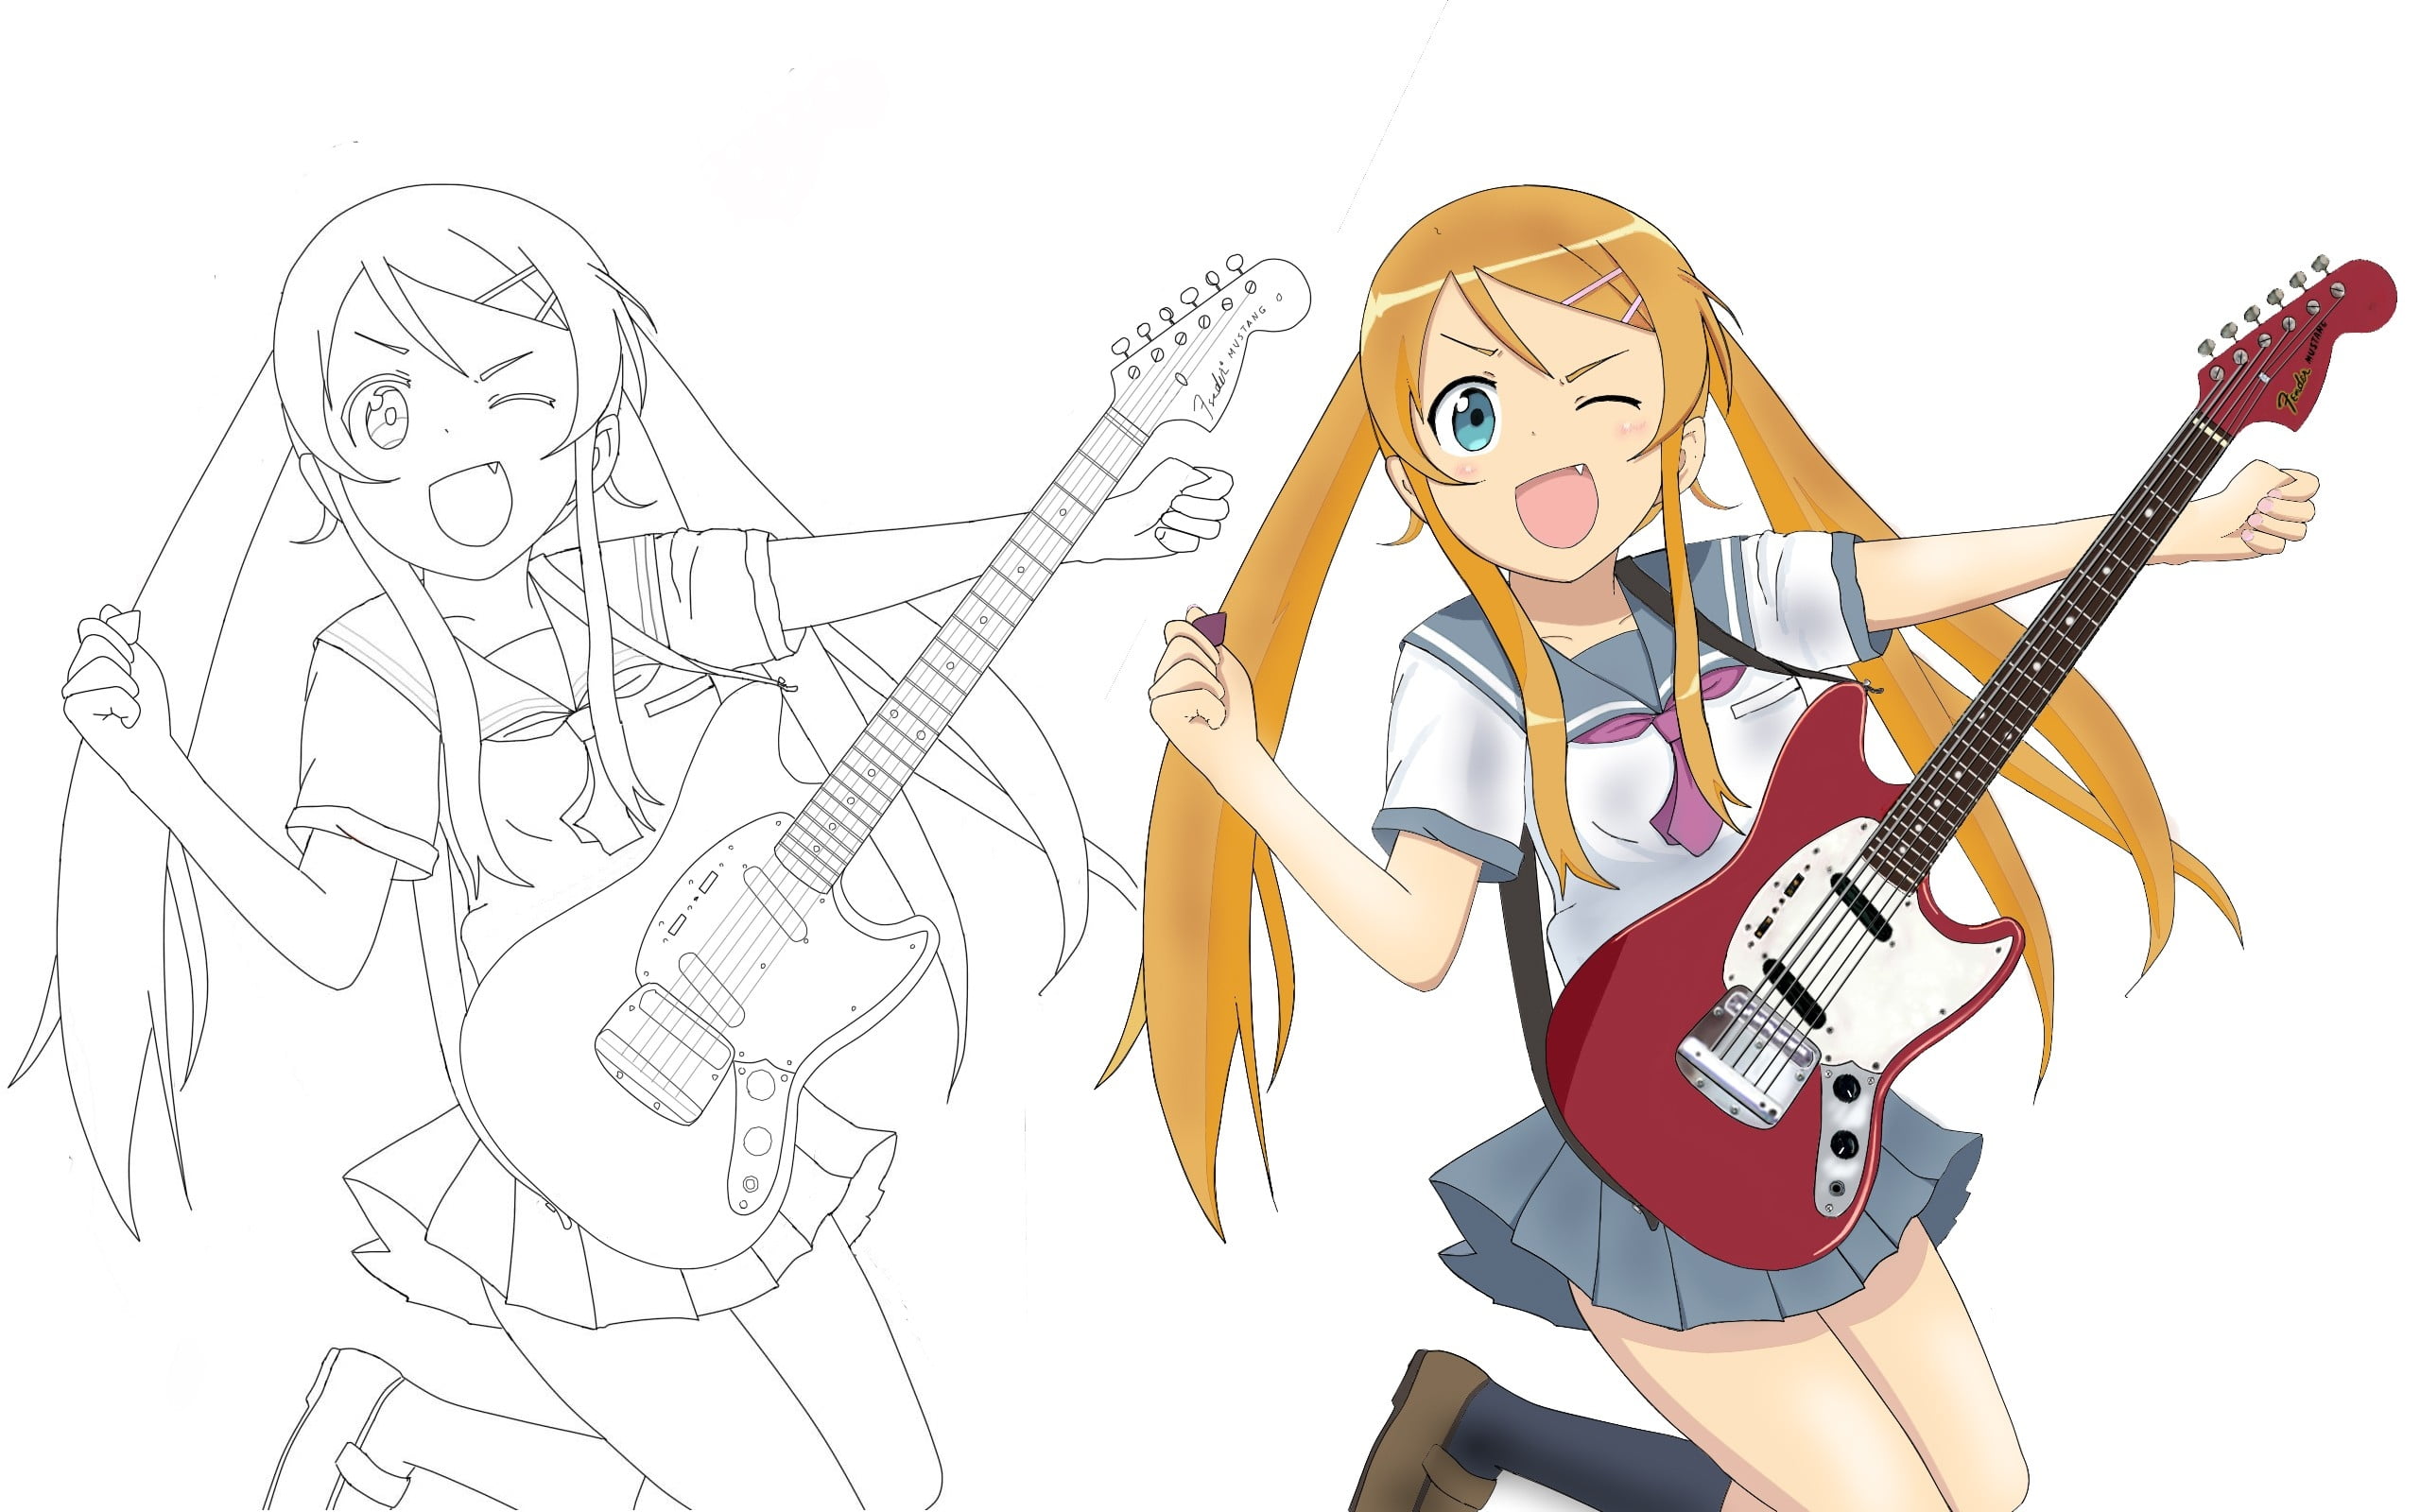 Yui from K-On